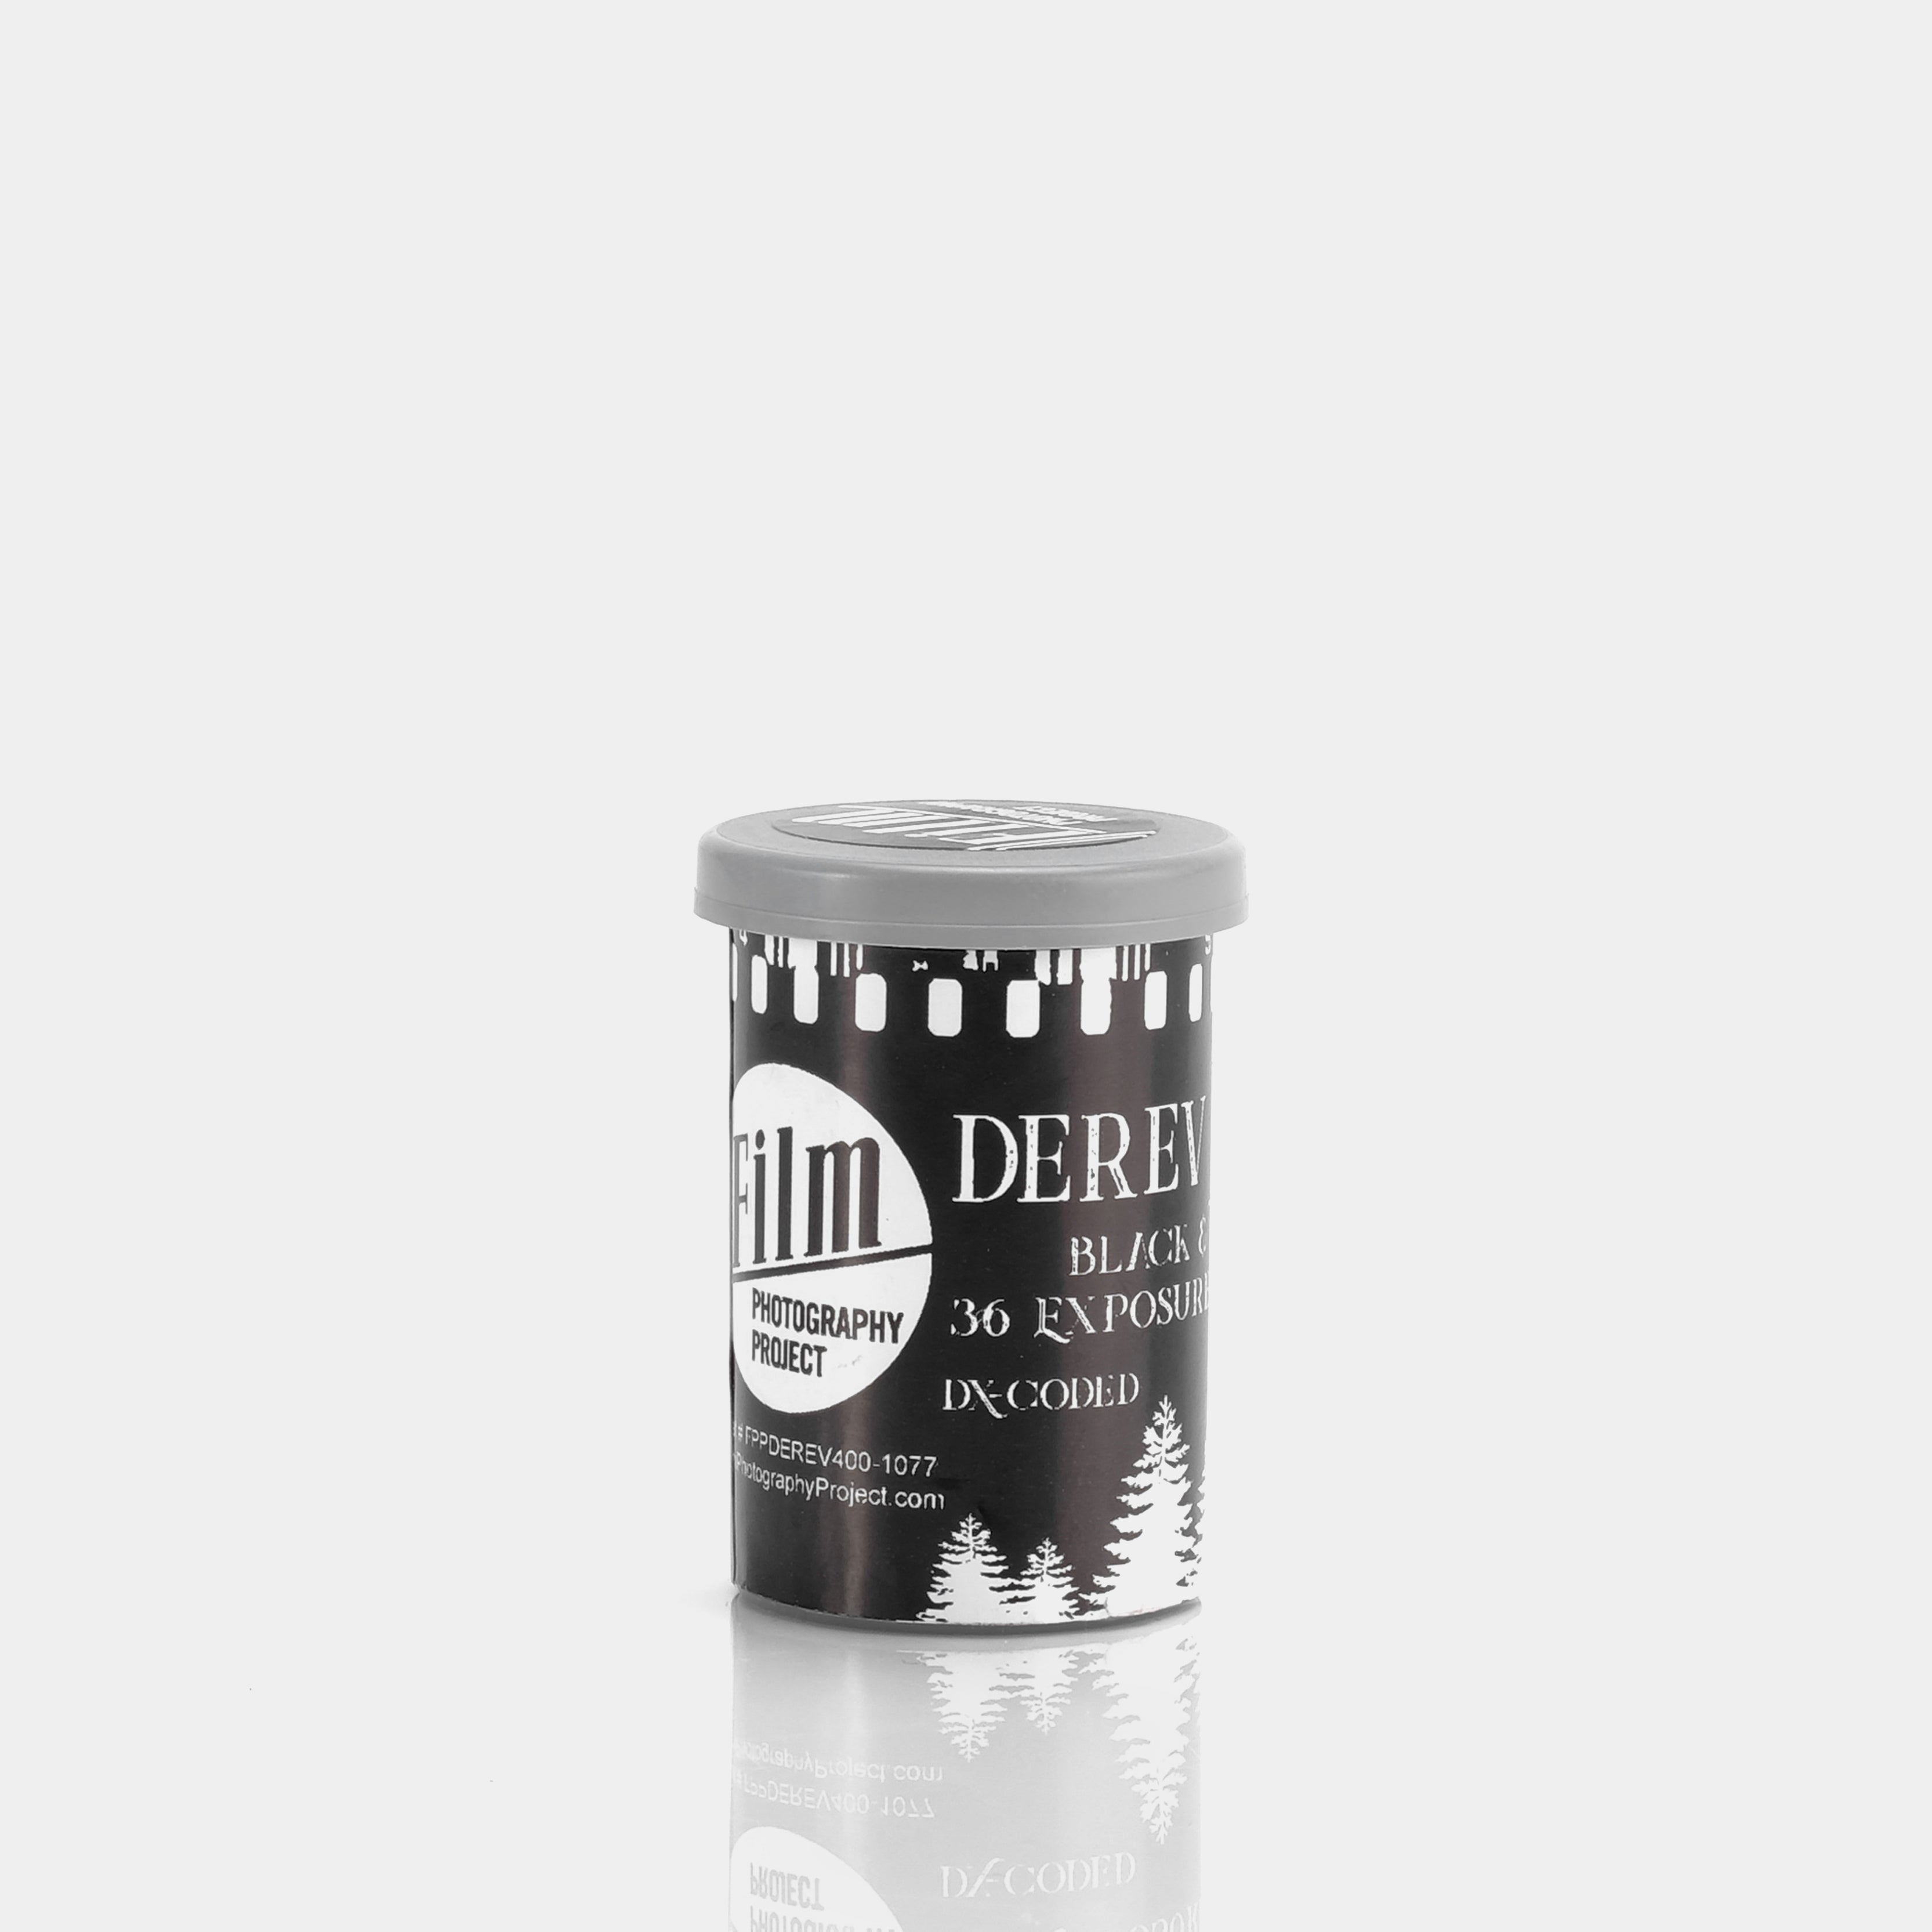 Film Photography Project Derev Pan 400 Black and White 35mm Film (36 Exposures)